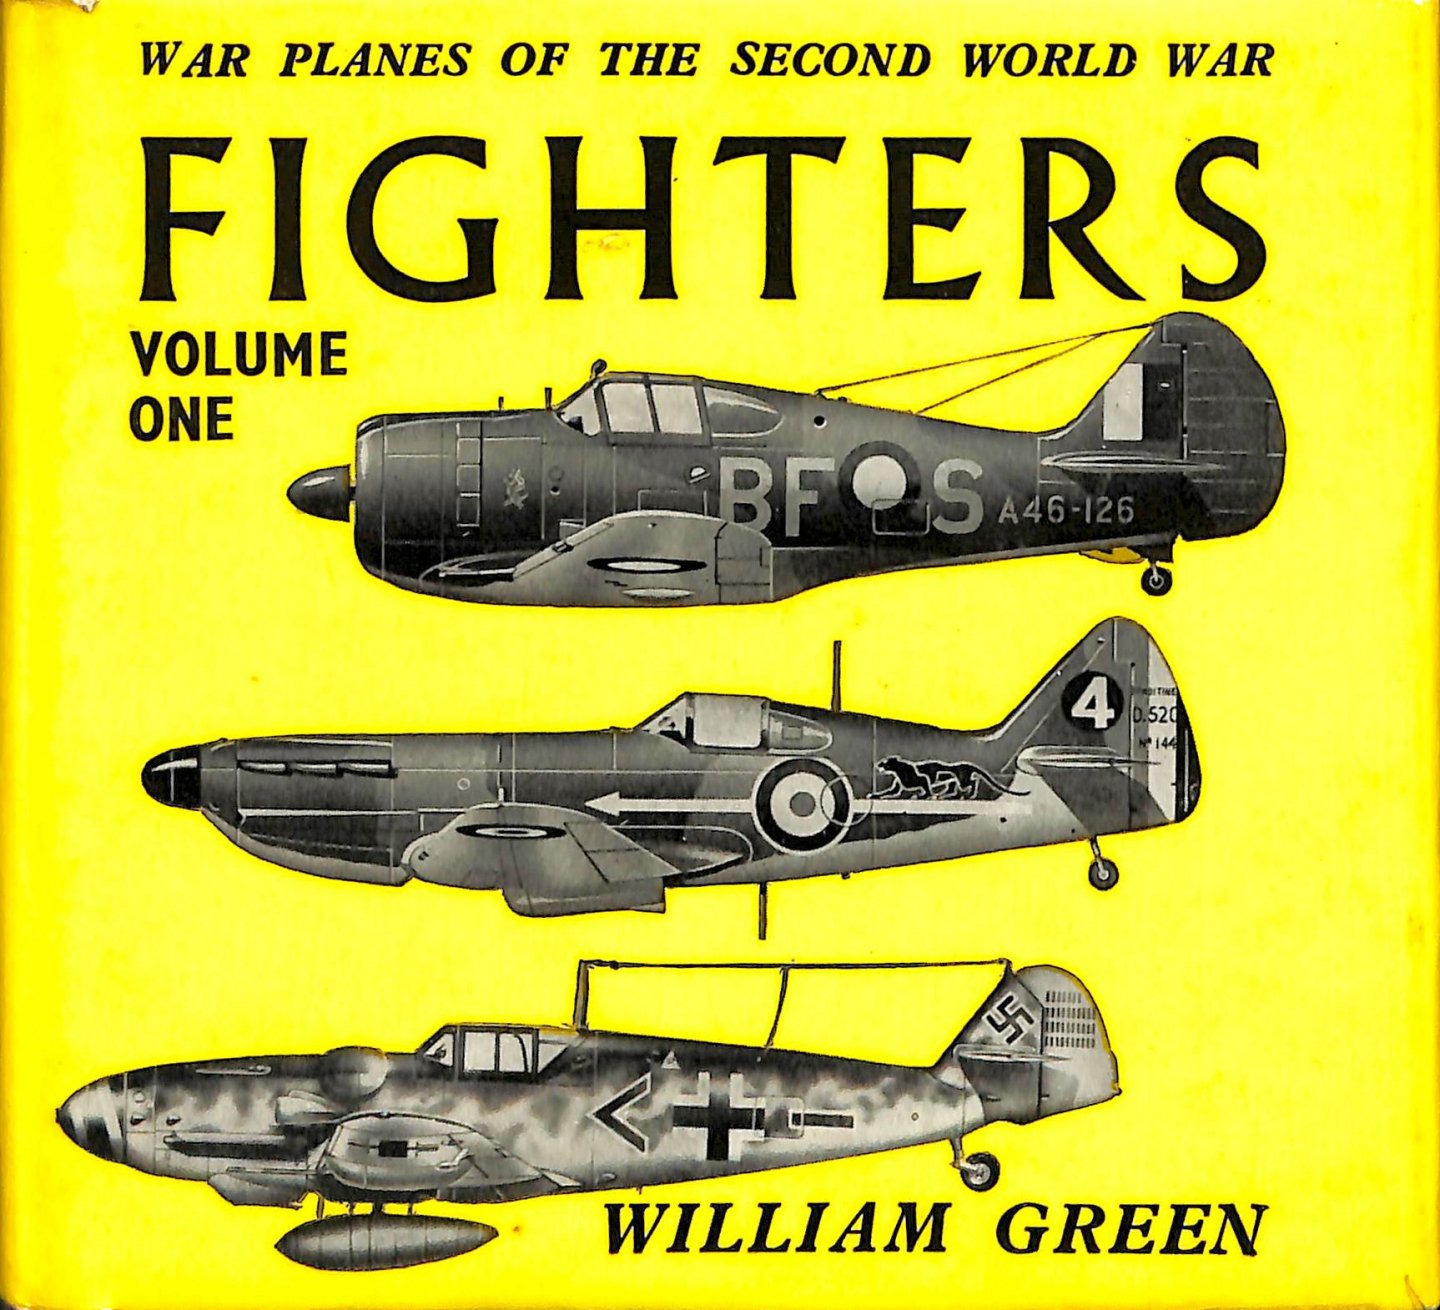 Green, William - War planes of the second world war volume one. Fighters